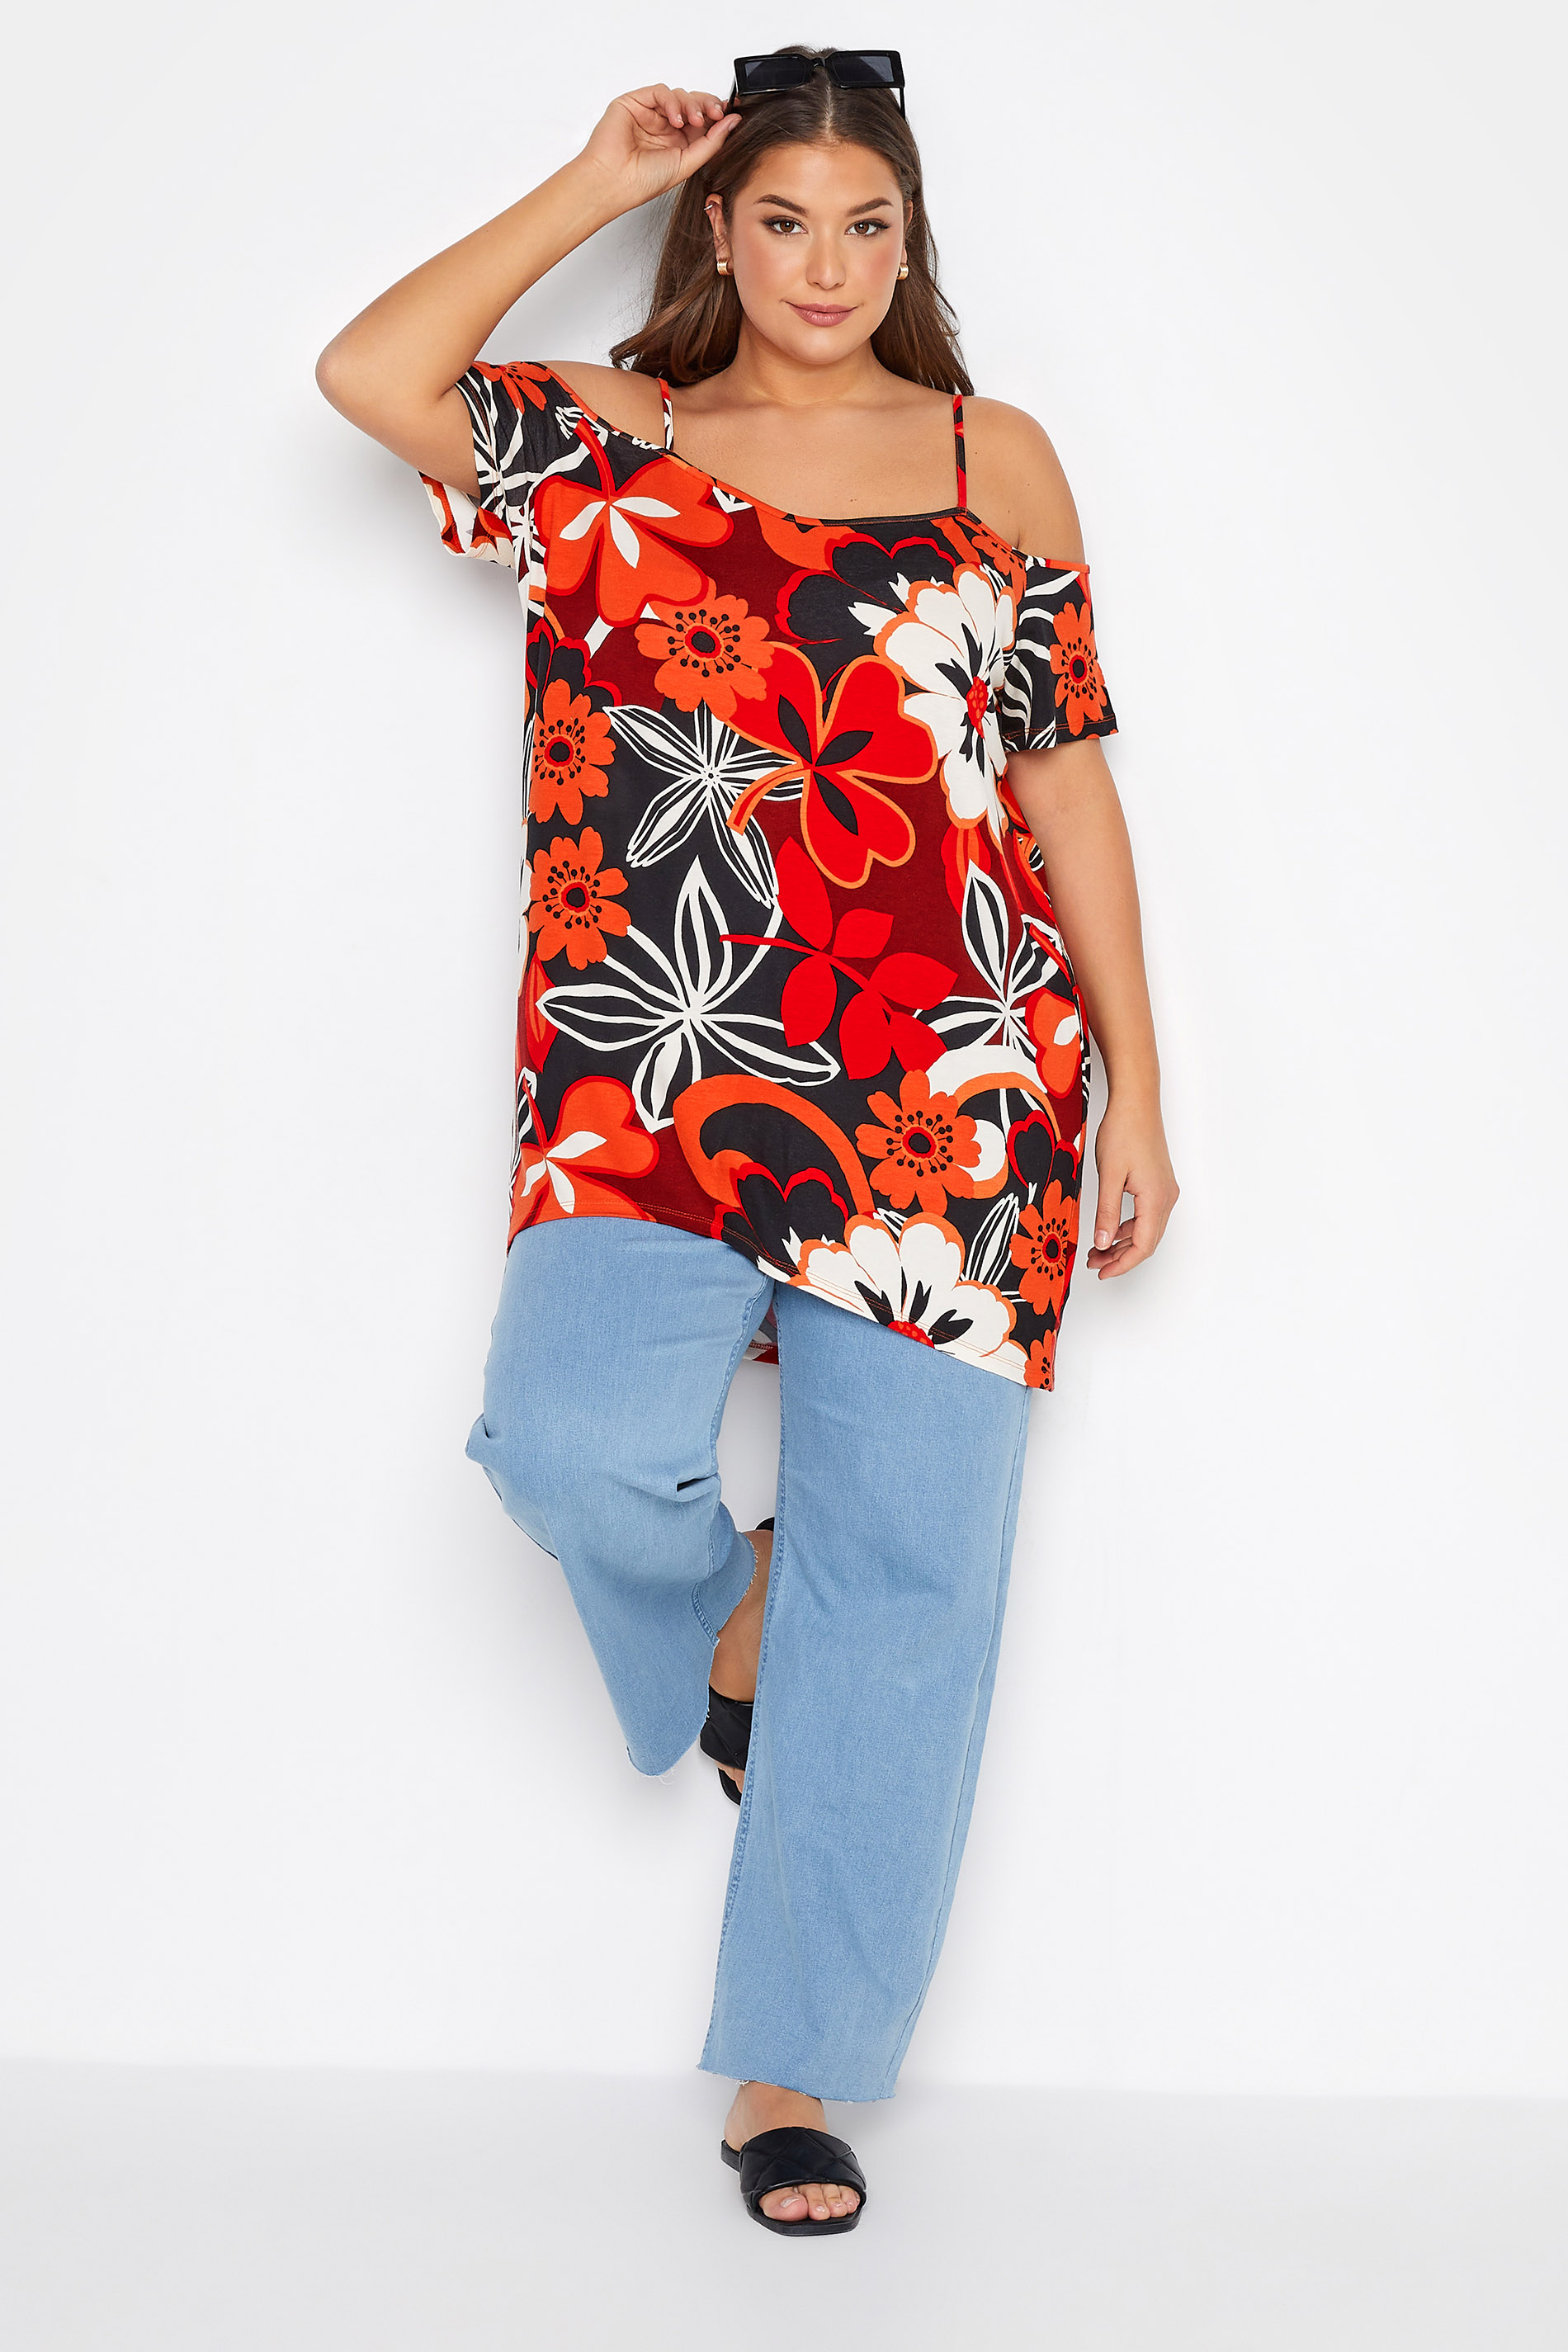 Grande taille  Tops Grande taille  Tops Épaules Ajourées & Style Bardot | Top Rouge Tropical Floral Style Bardot - MF84084